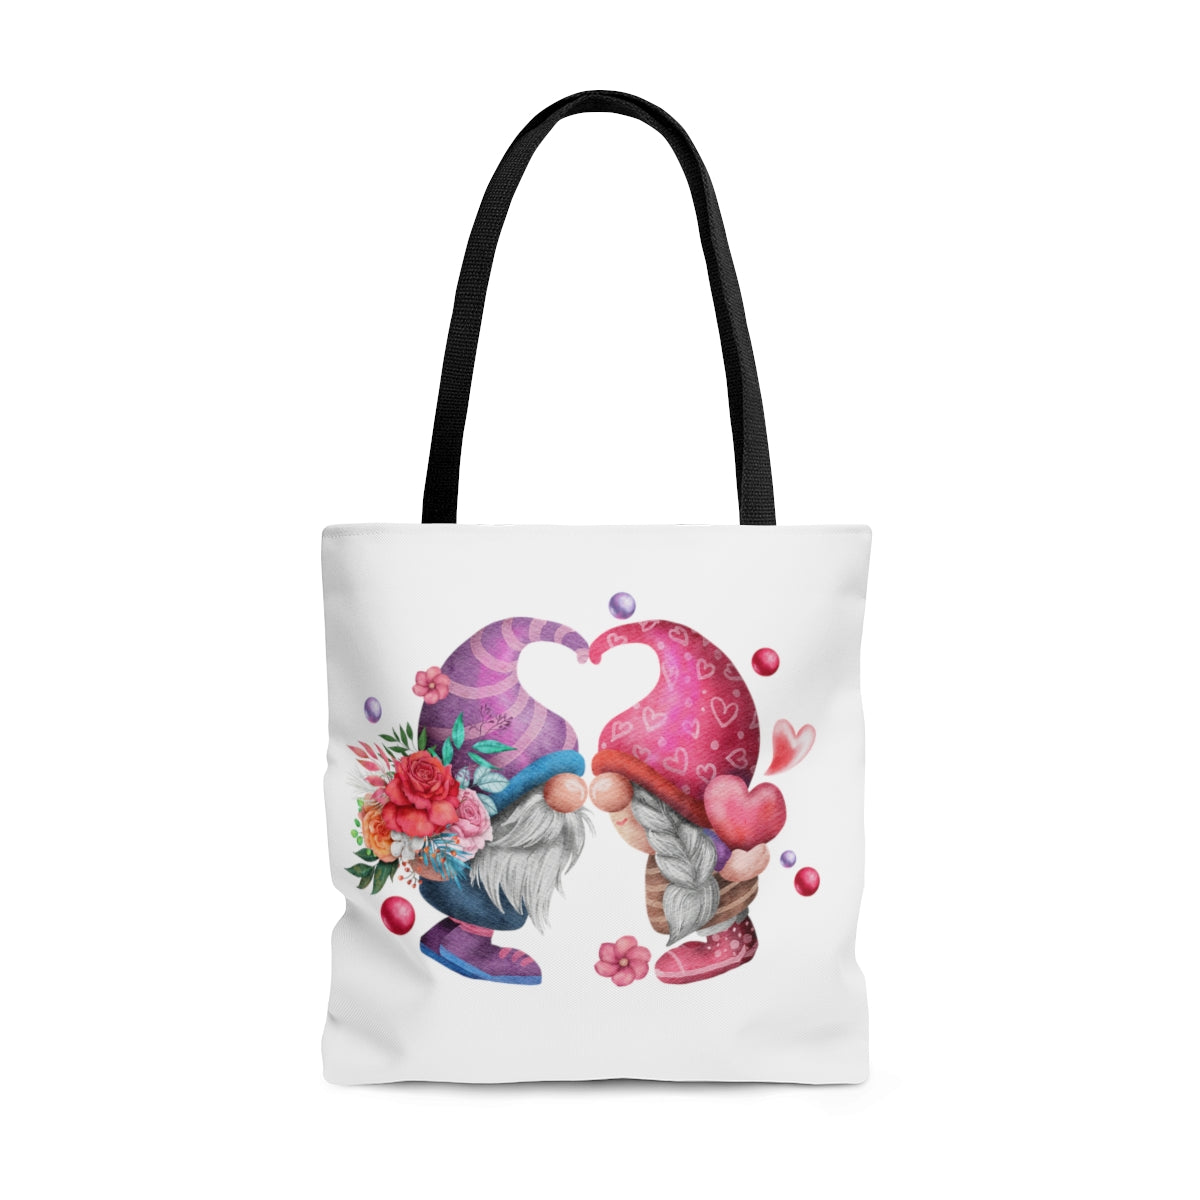 gnome tote bag with gnome couple and hearts for valentines day gift